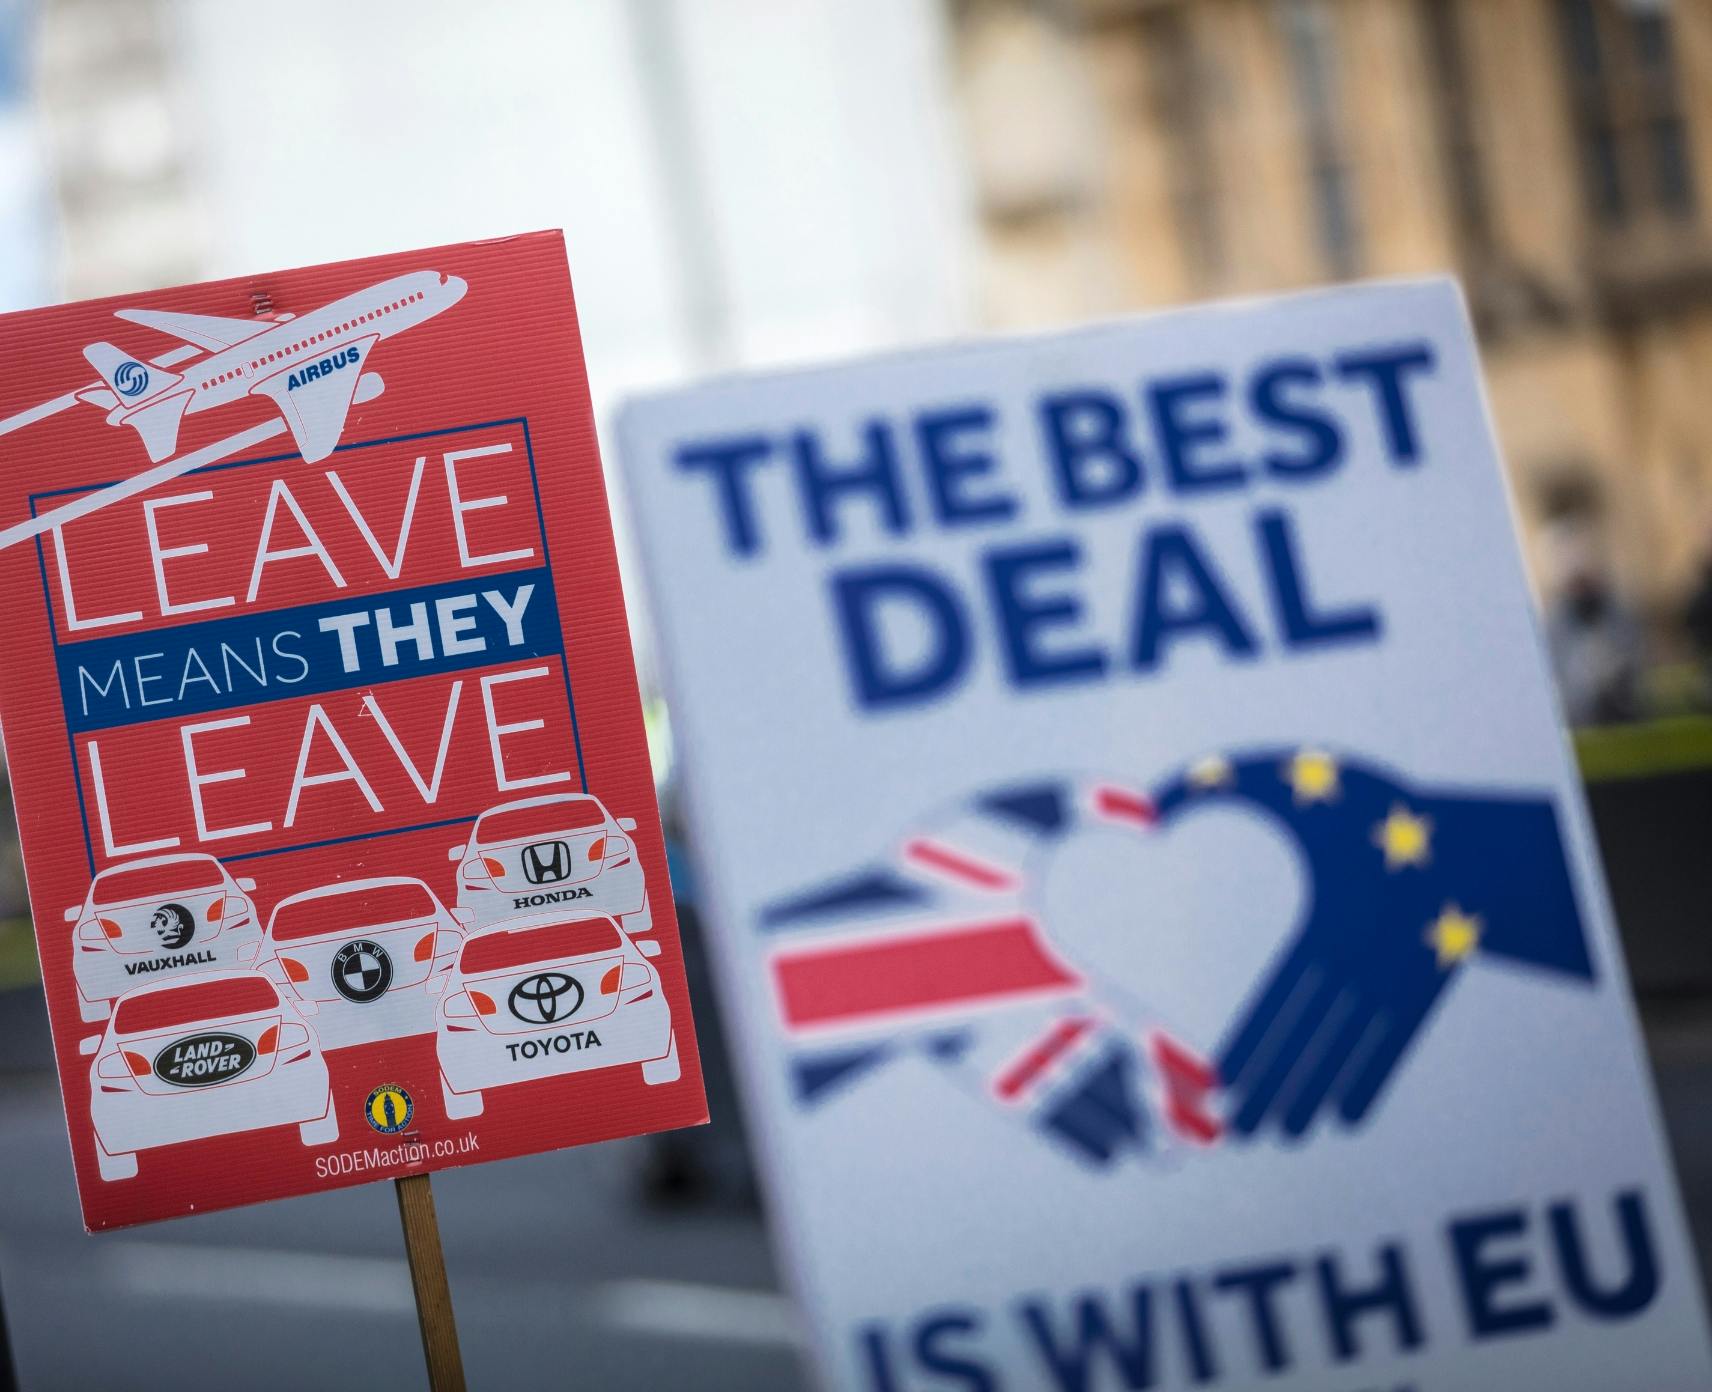 Signs from 2019 protest against Brexit